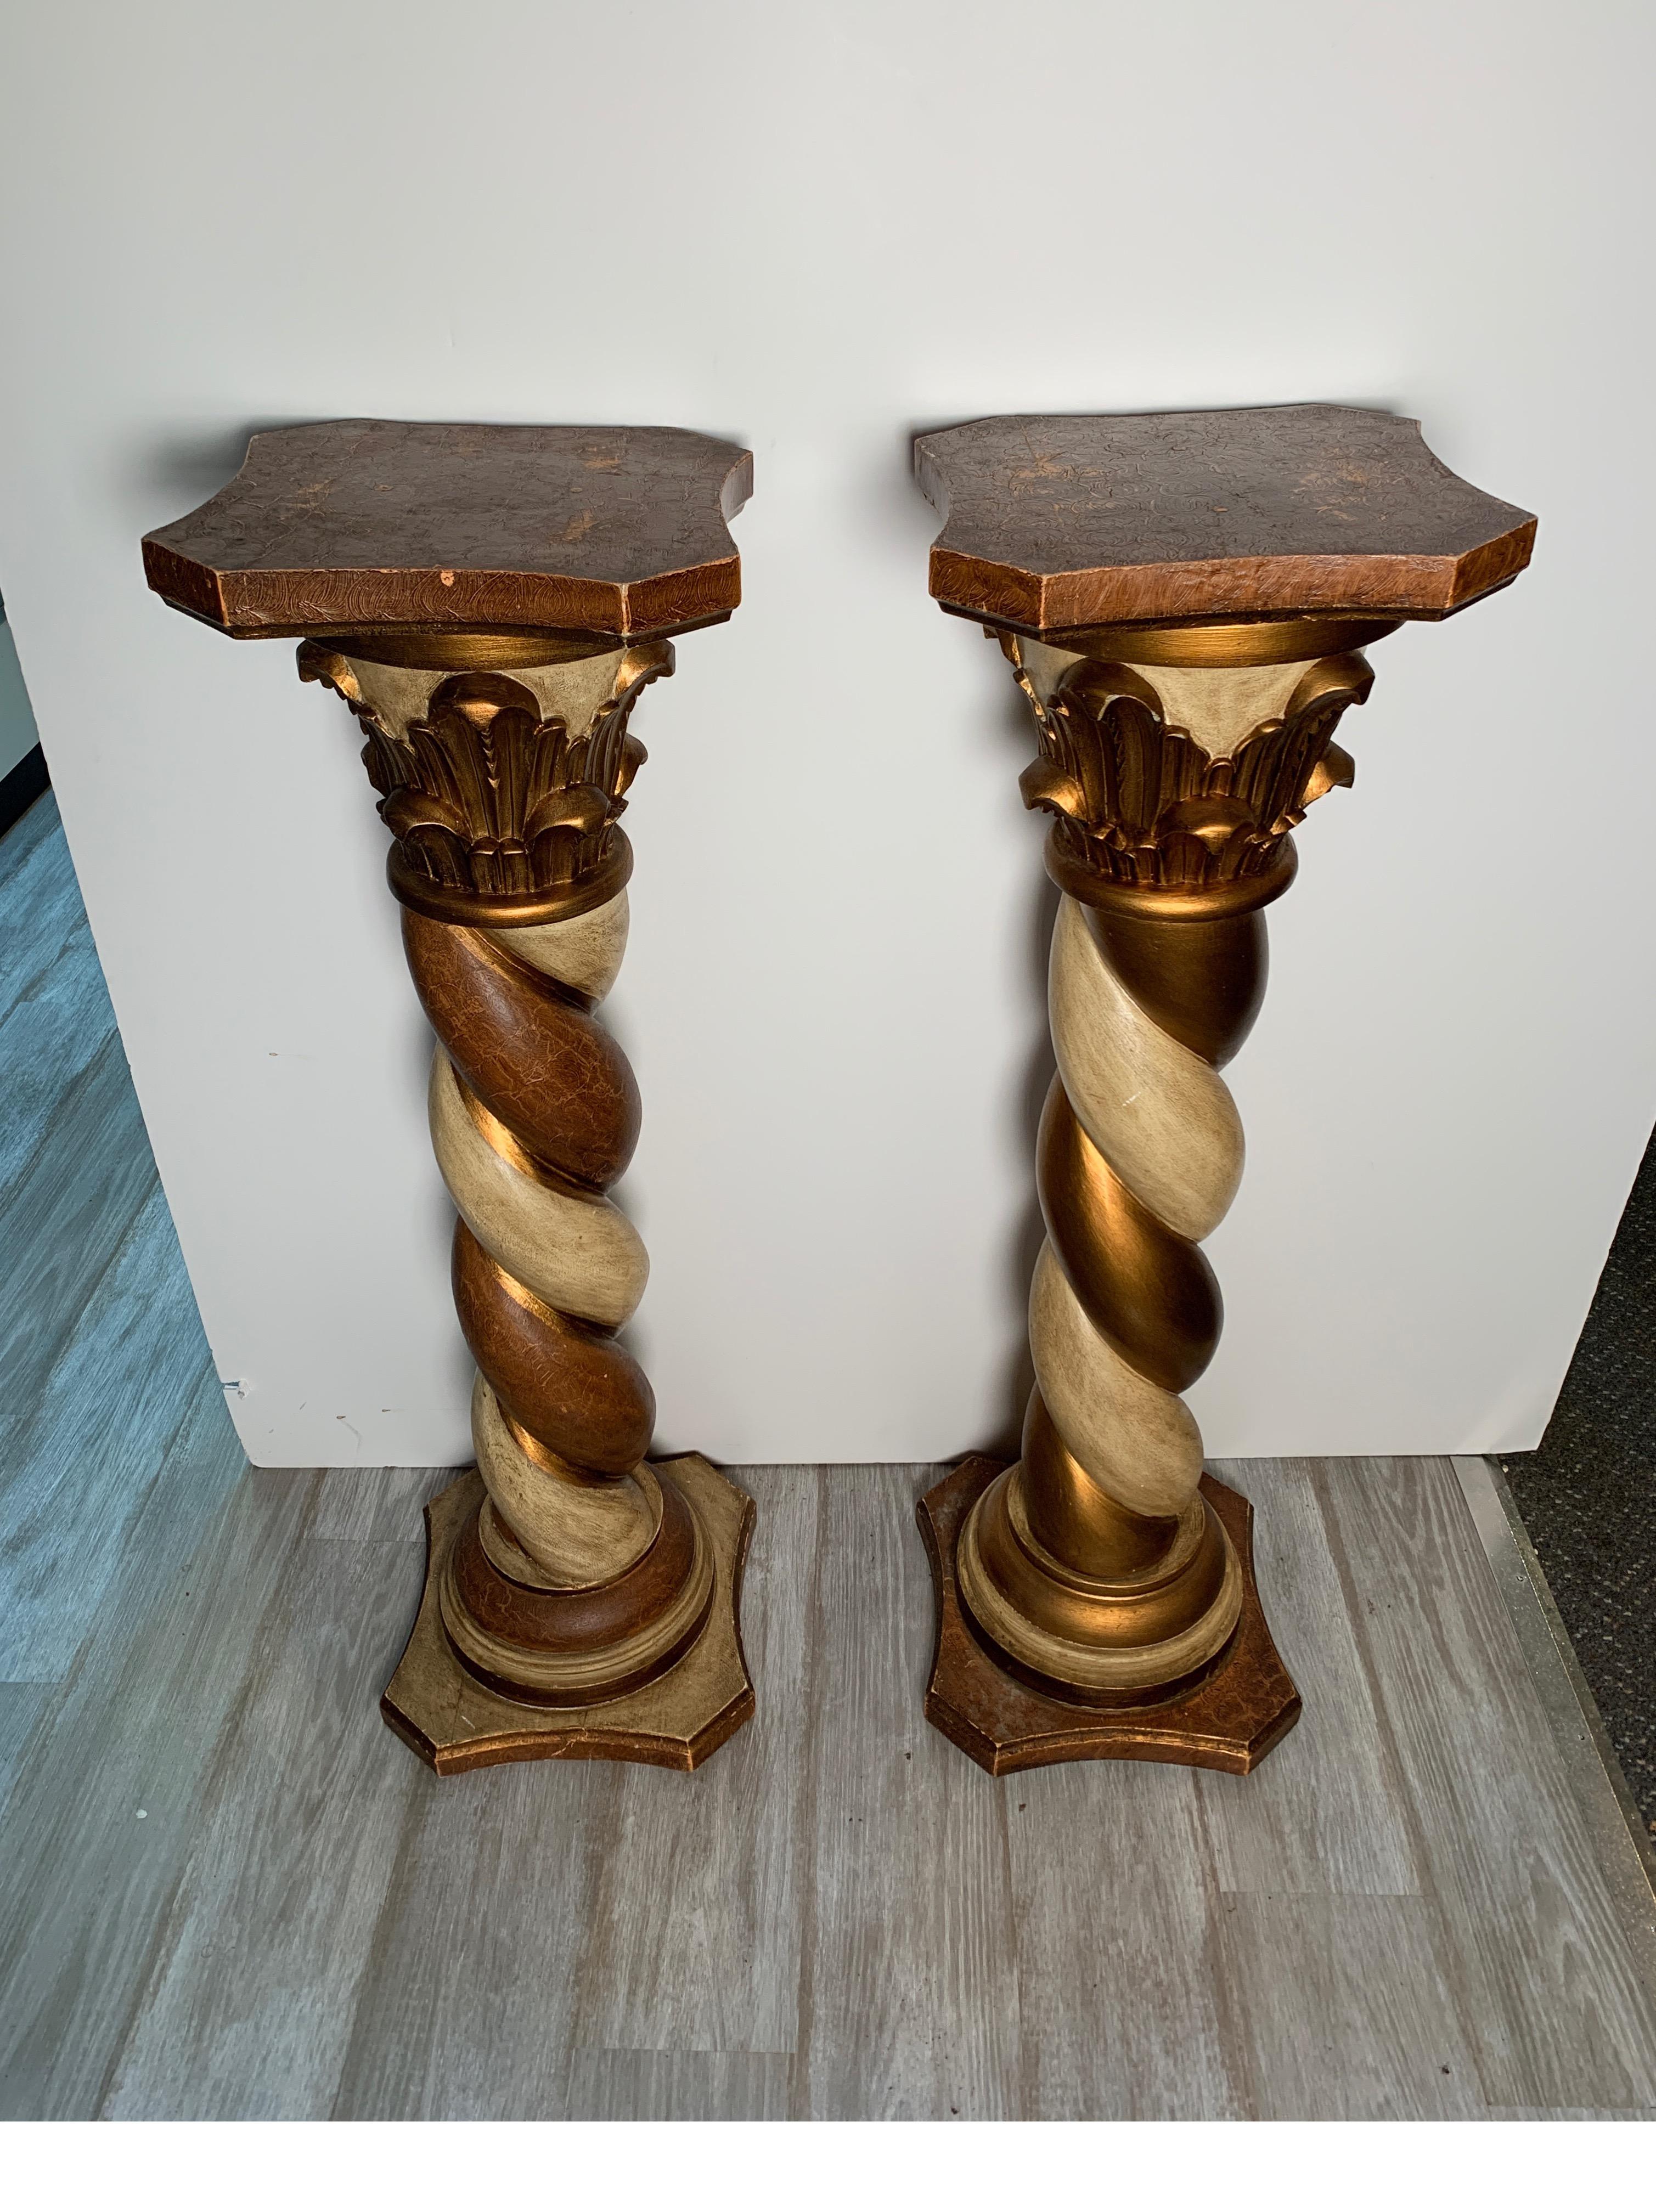 Midcentury pair of carved wood pedestals with decorative faux painting
Nice pair of whimsical painted pedestals from the 1960s.